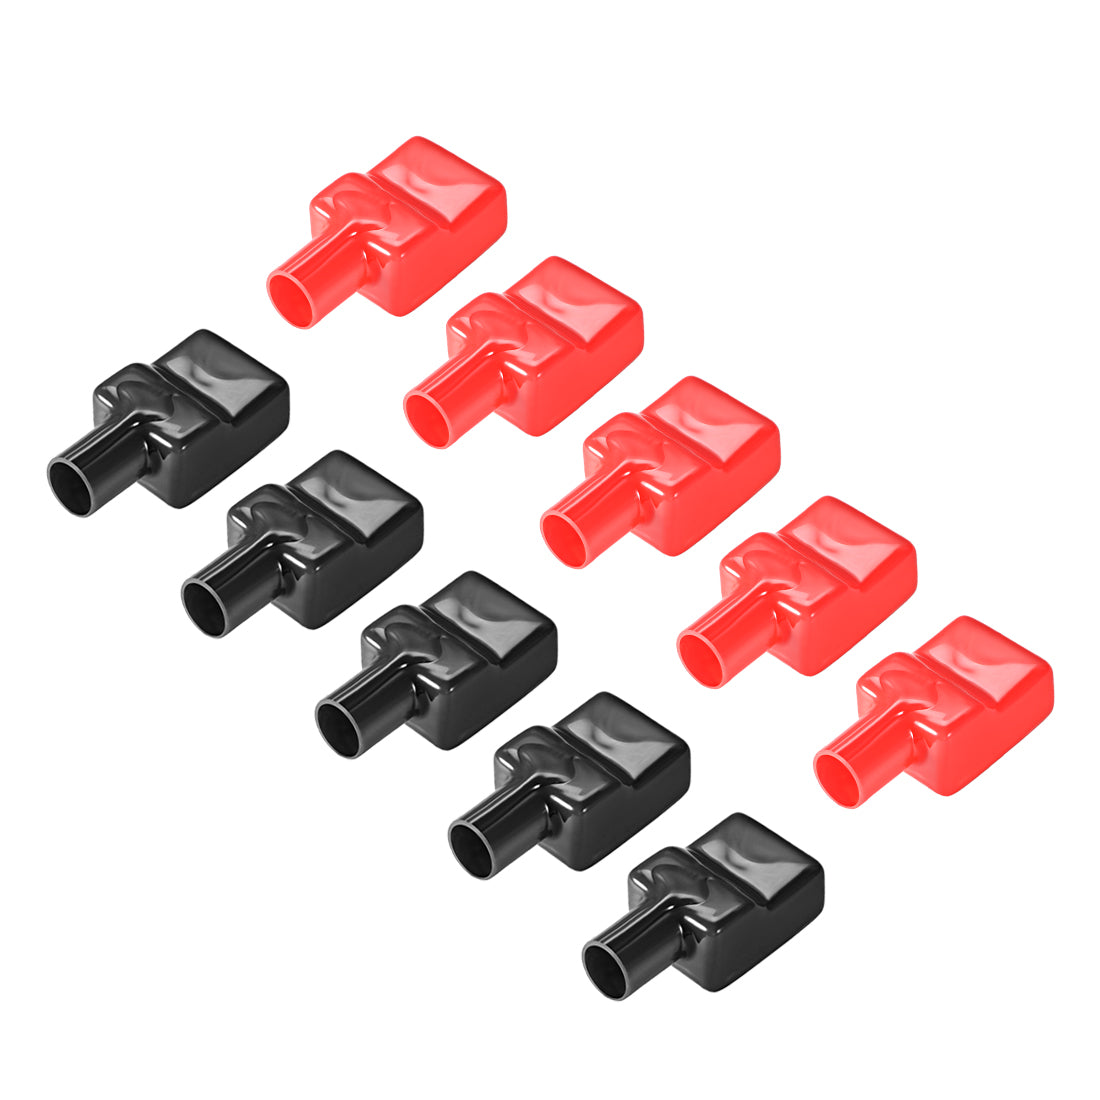 uxcell Uxcell Flexible Battery Terminal Insulating Rubber Protector Covers for 15mm Cable Red Black 5 Pairs